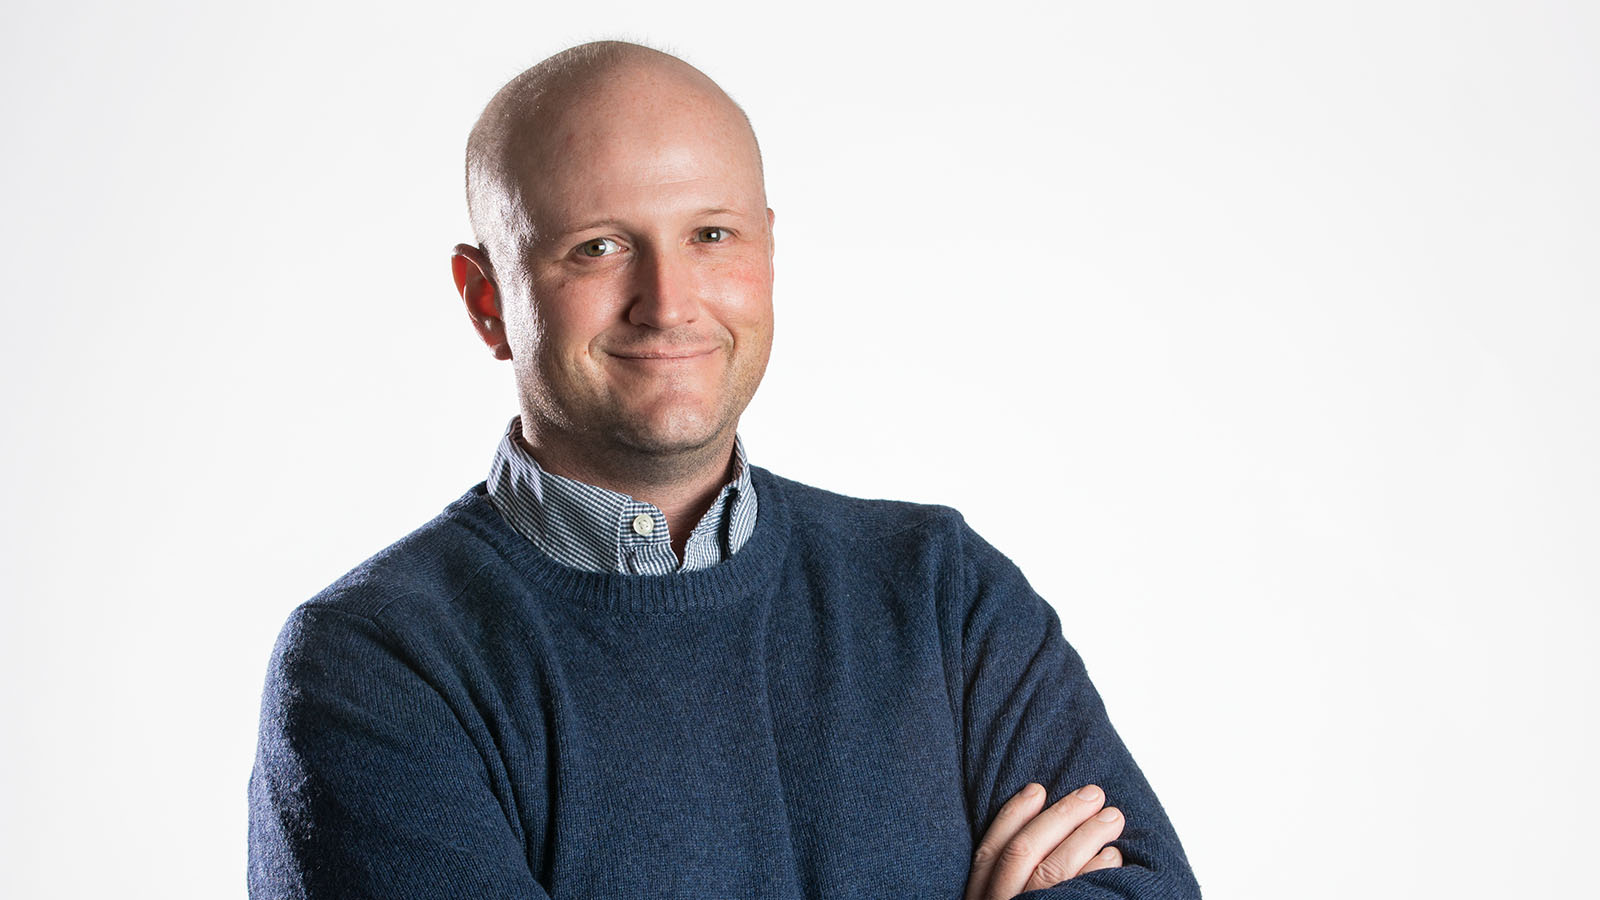 Upfront & Personal: Jason Janofsky, Betterview’s VP of Engineering, CTO